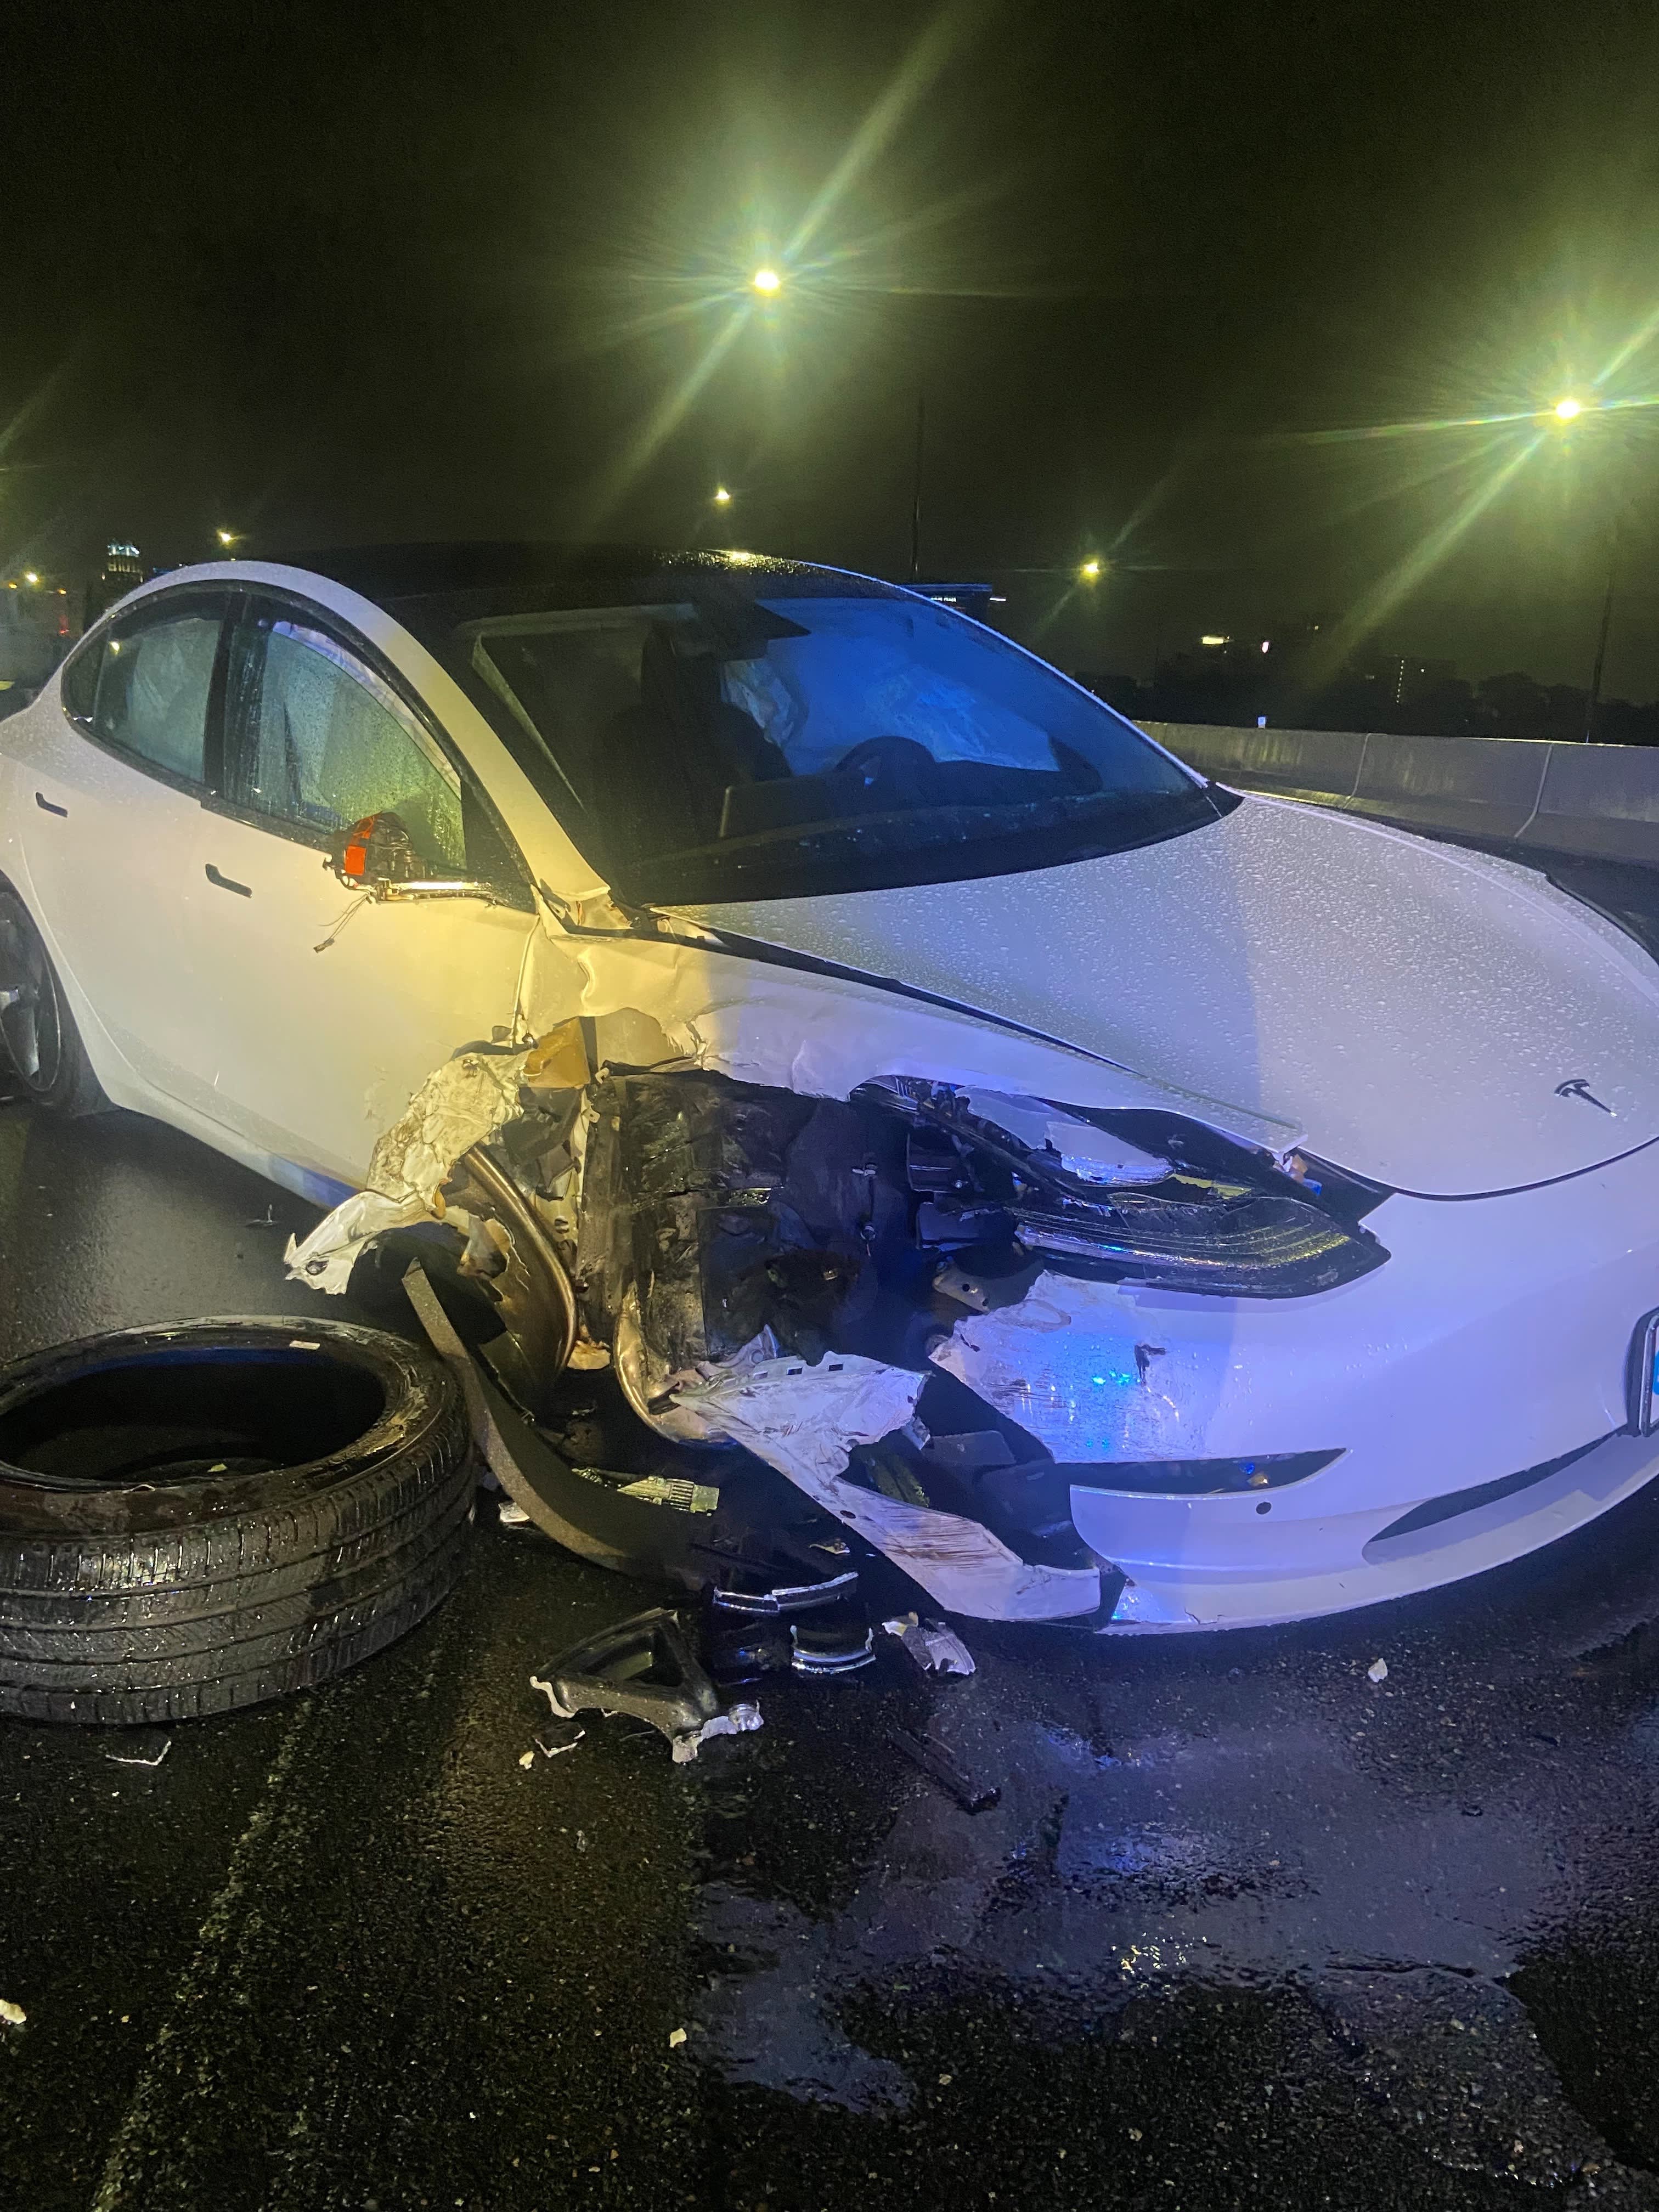 Tesla Model 3 hit a parked police car in Orlando, driver said she was ‘in Autopilot’